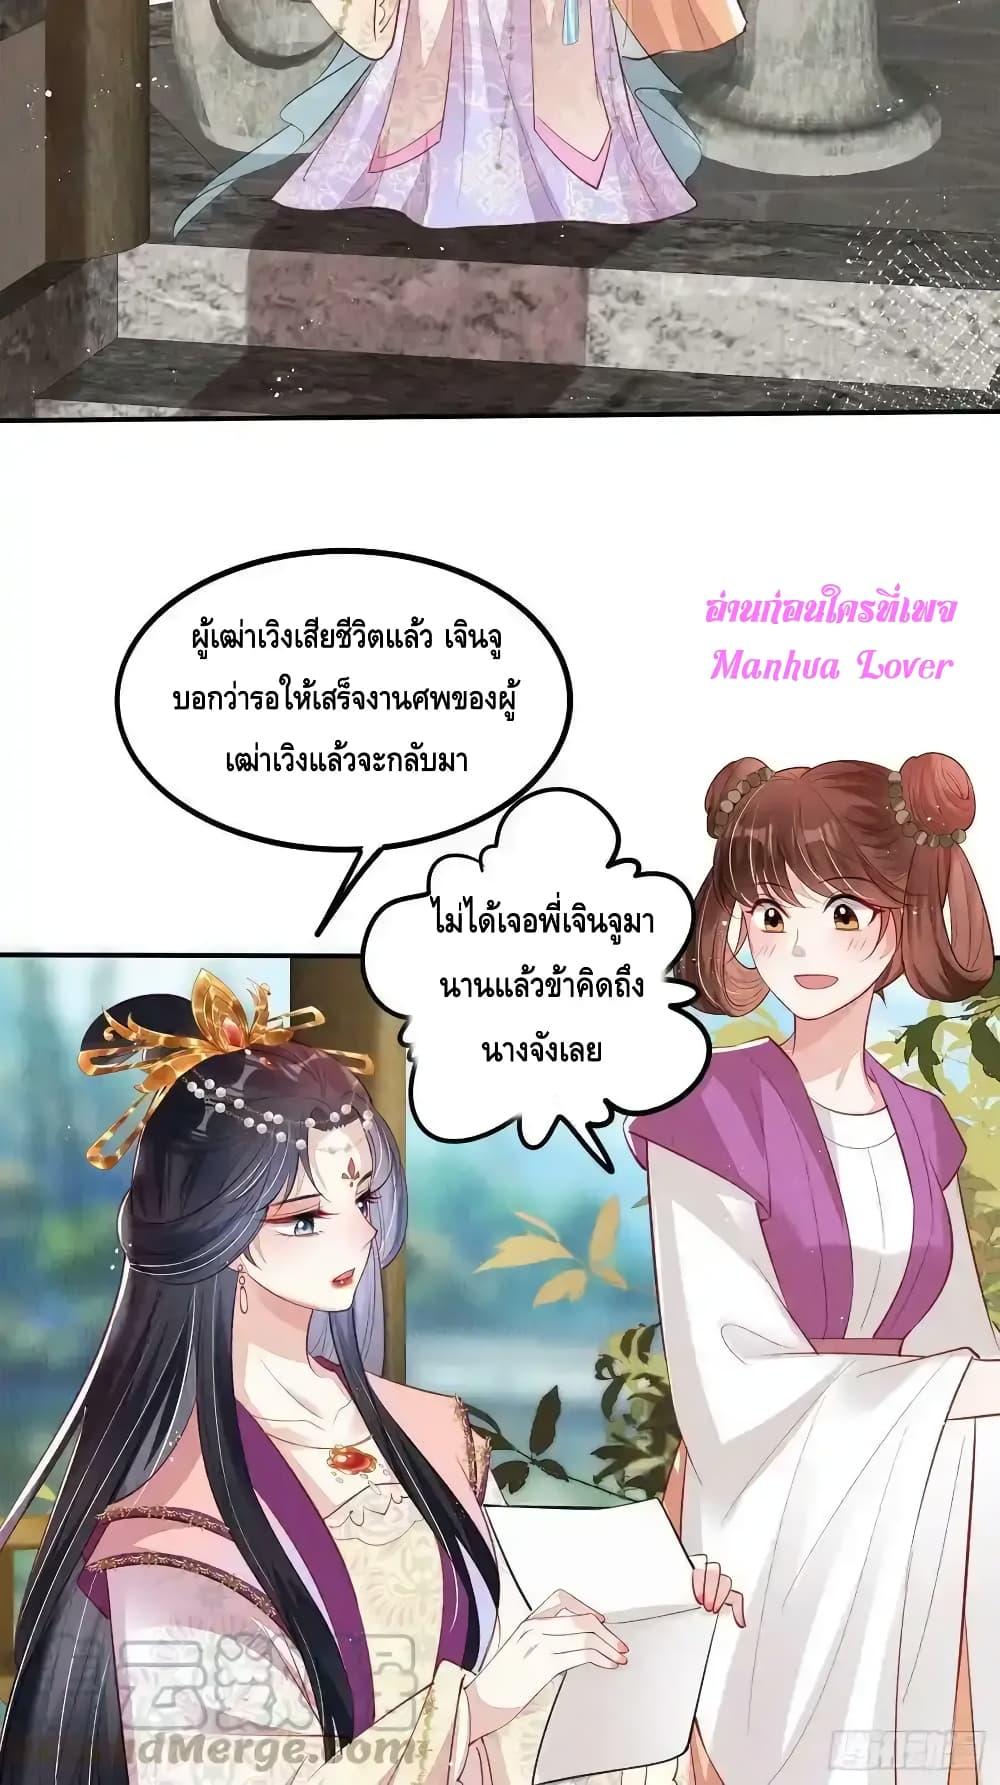 After I Bloom, a Hundred Flowers Will ill – ดอกไม้นับ ตอนที่ 70 (17)